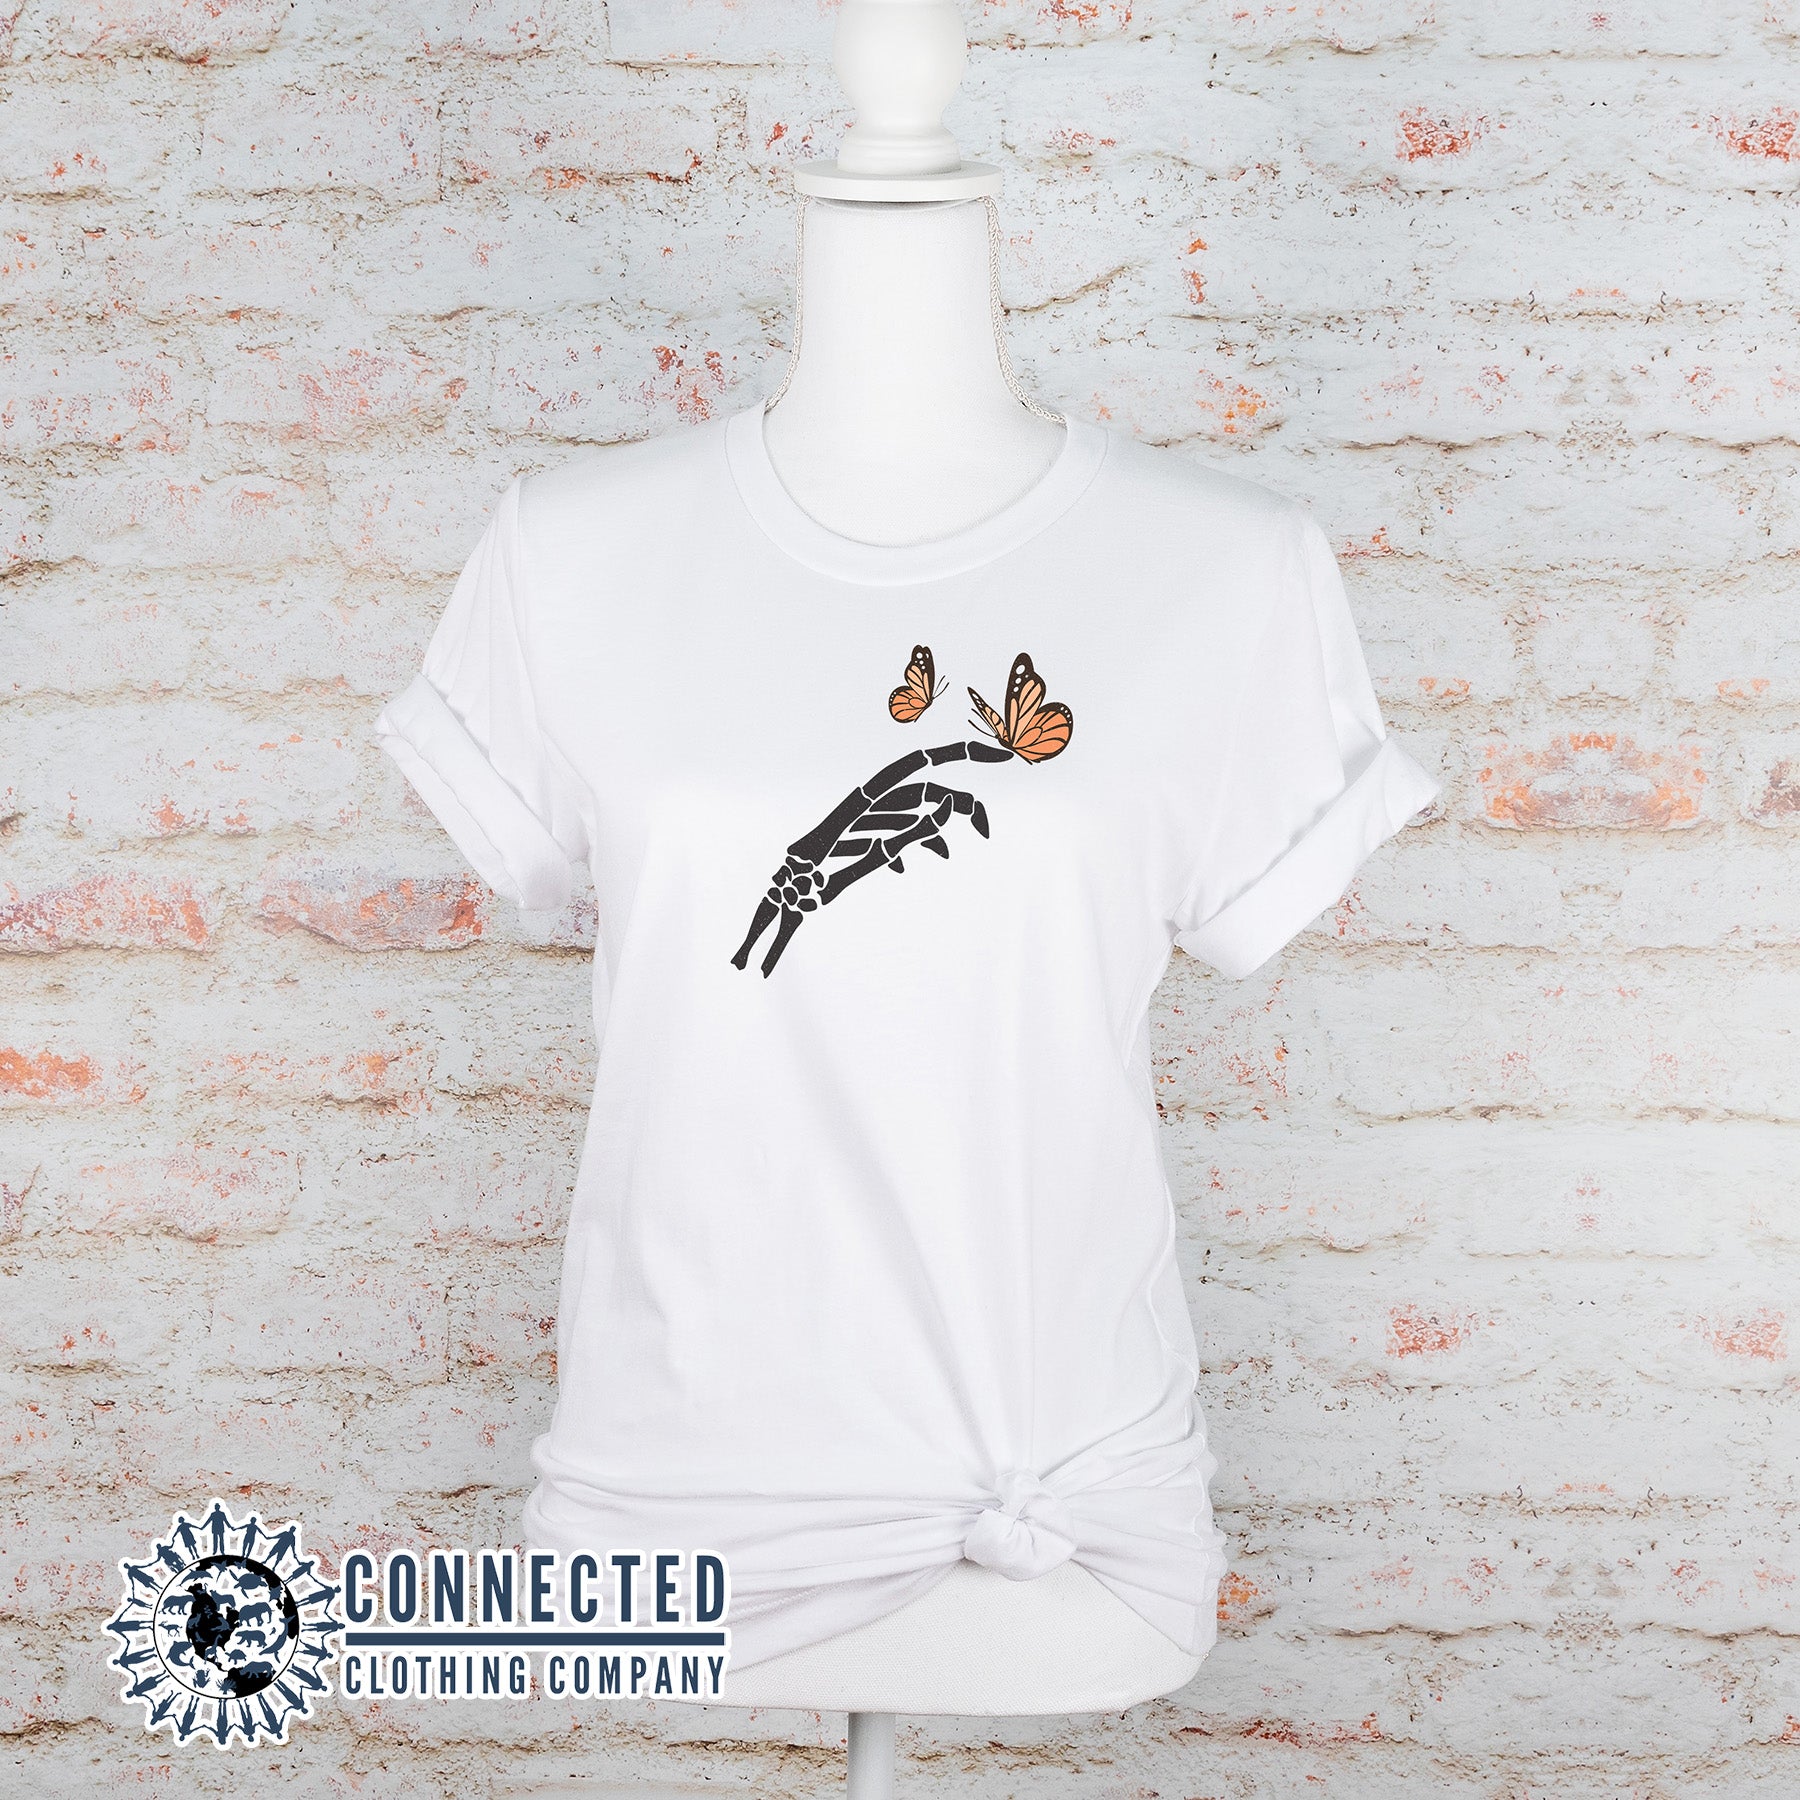 Skeleton Monarch Tee - Connected Clothing Company - 10% of proceeds donated to save the monarch butterflies